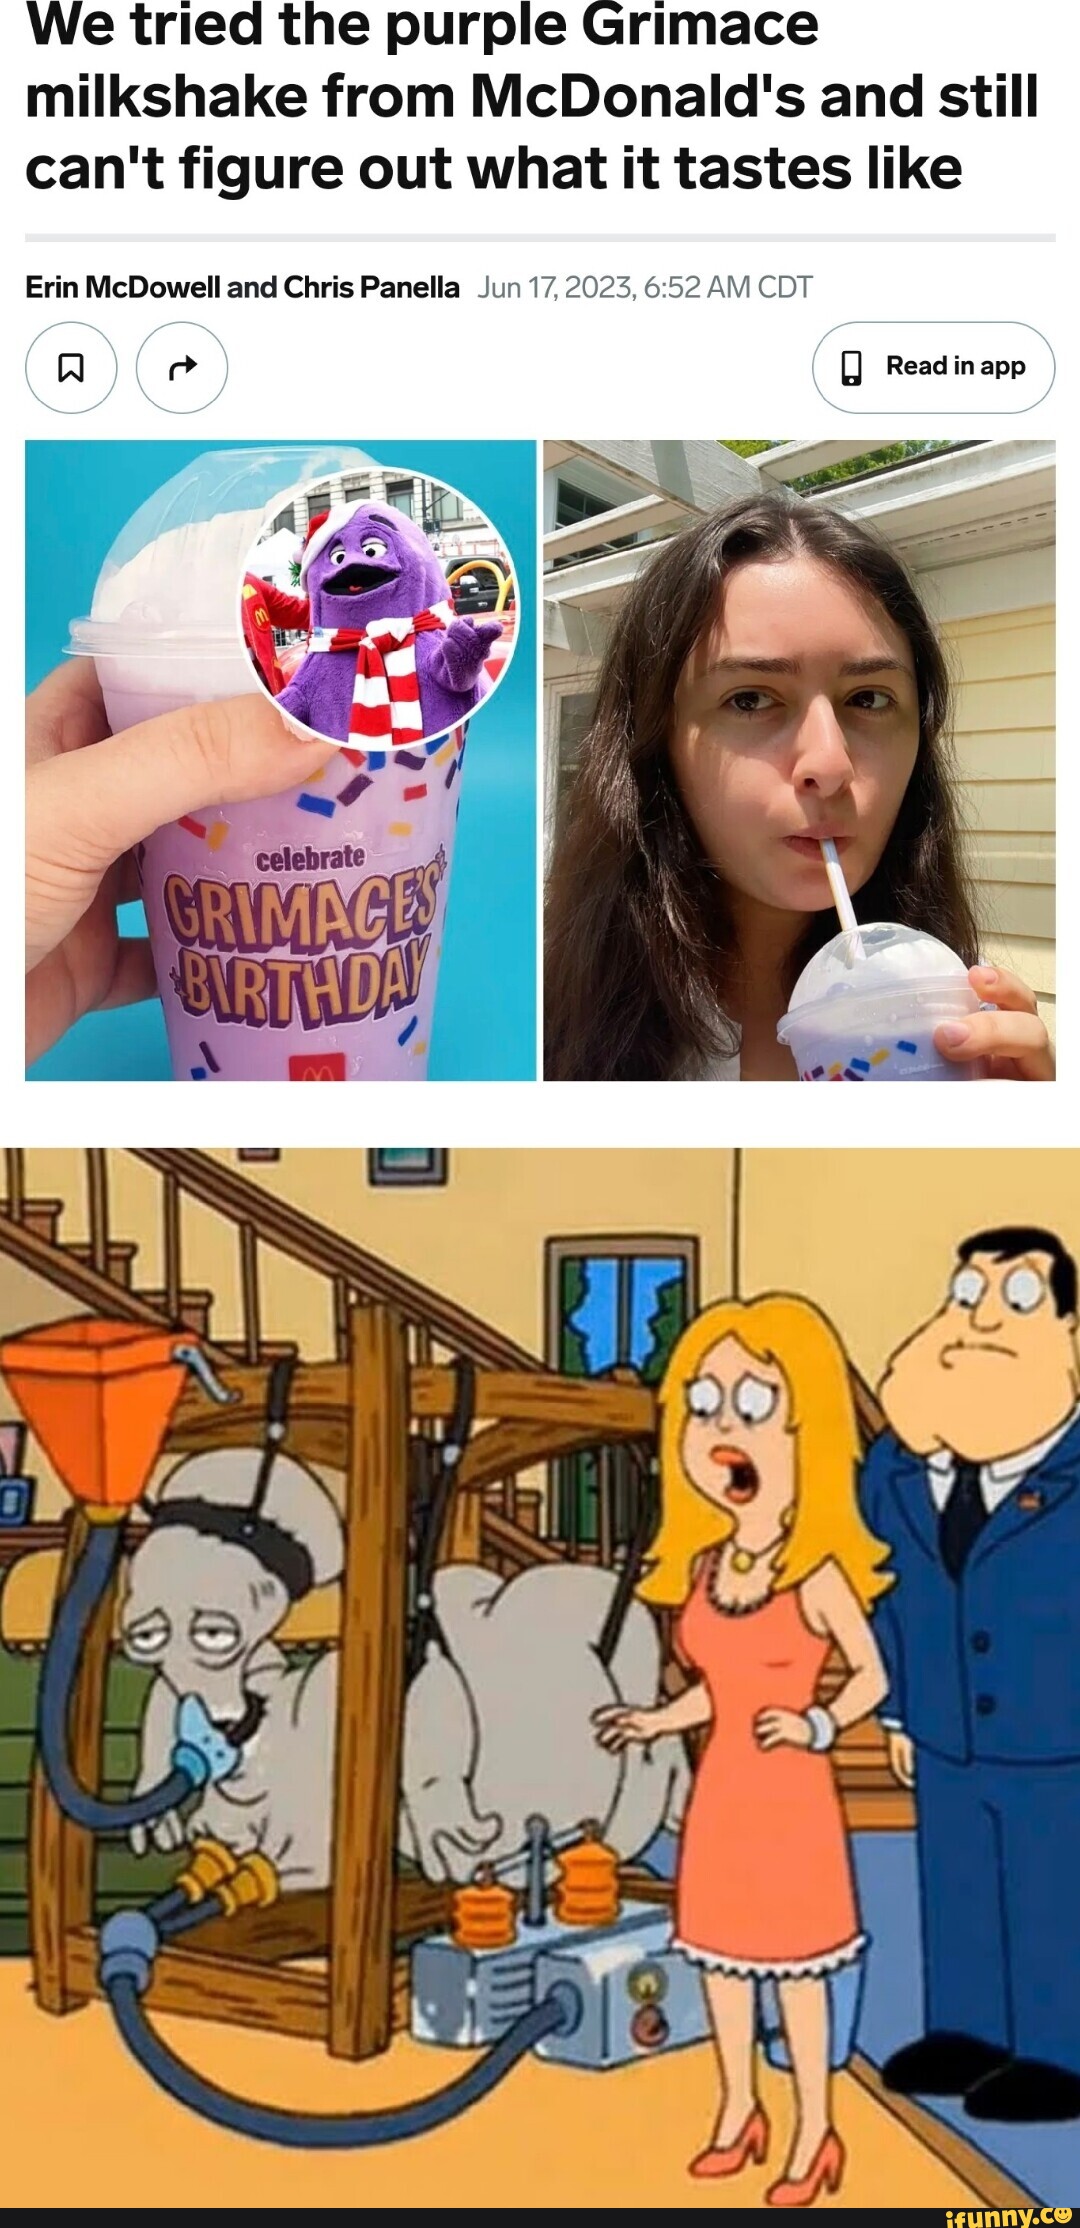 We Tried The Purple Grimace Milkshake From Mcdonalds And Still Cant Figure Out What It Tastes 8888